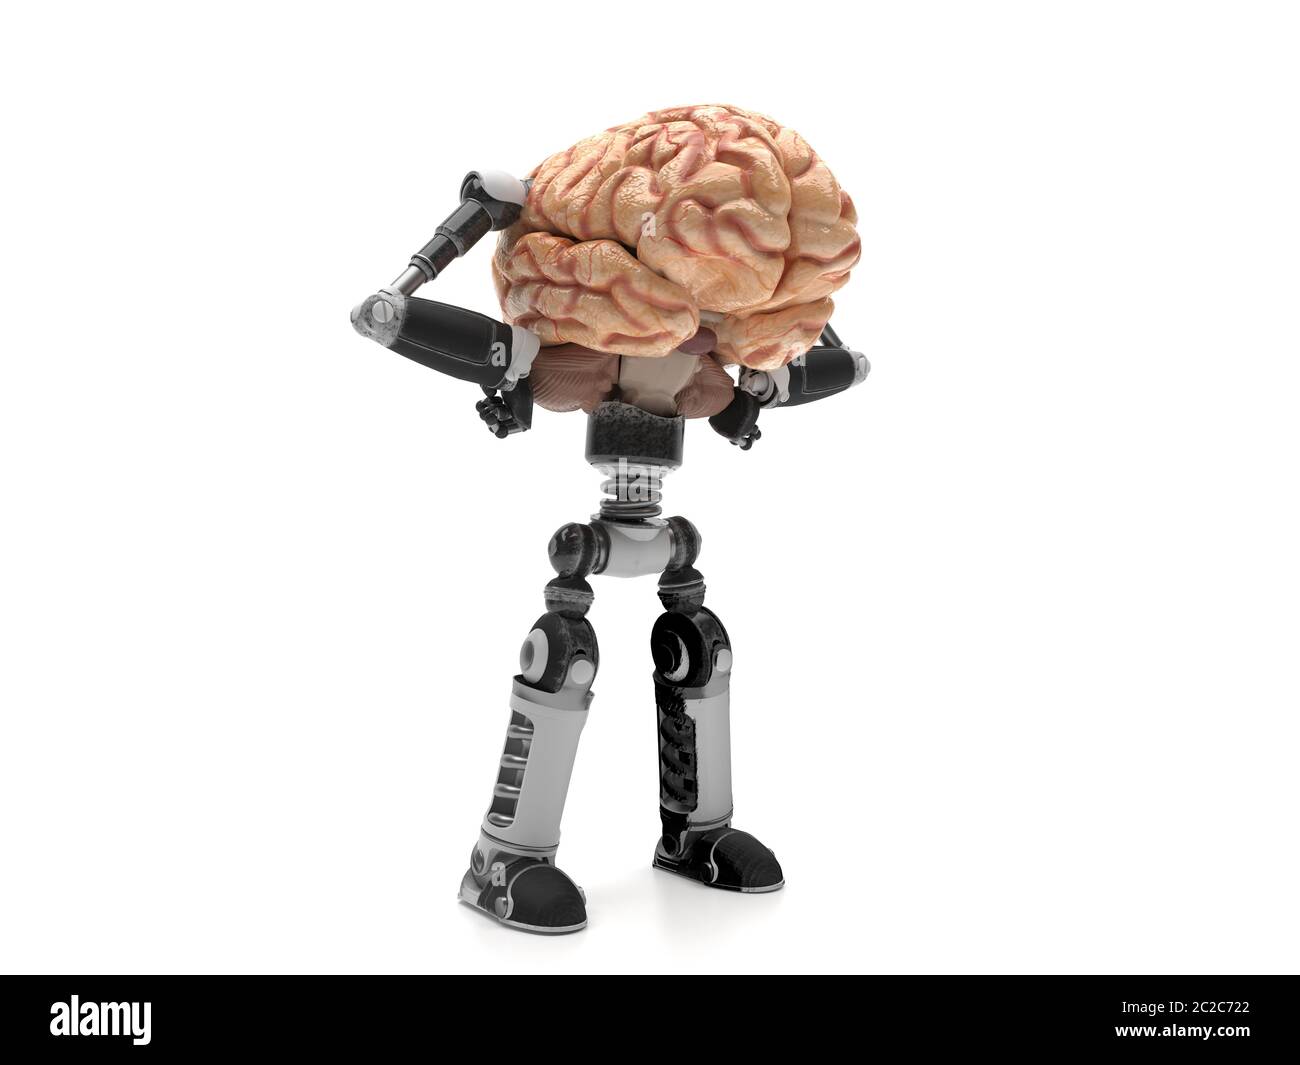 Robot with iron arms, legs and a living human brain is  isolated on white background. Artificial intelligence with human organs. Conceptual creative i Stock Photo